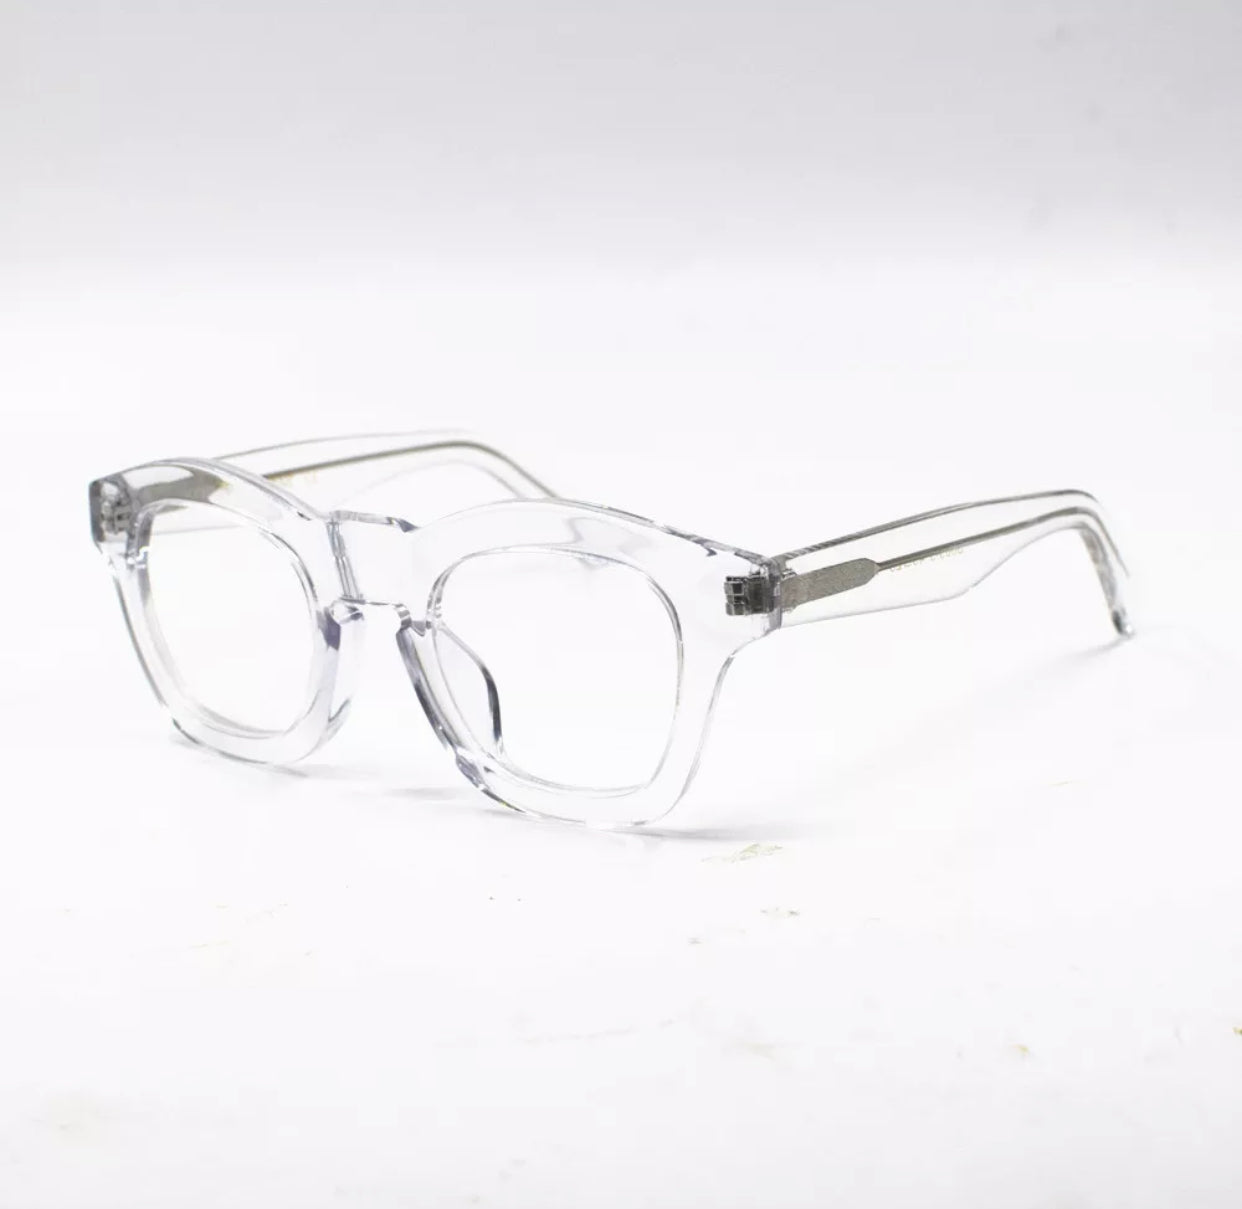 These contemporary glasses feature a unique all transparent frame that showcases a modern and minimalist style. Designed to be lightweight and comfortable, these glasses offer a clear and unobstructed view, allowing you to see the world with clarity and confidence.